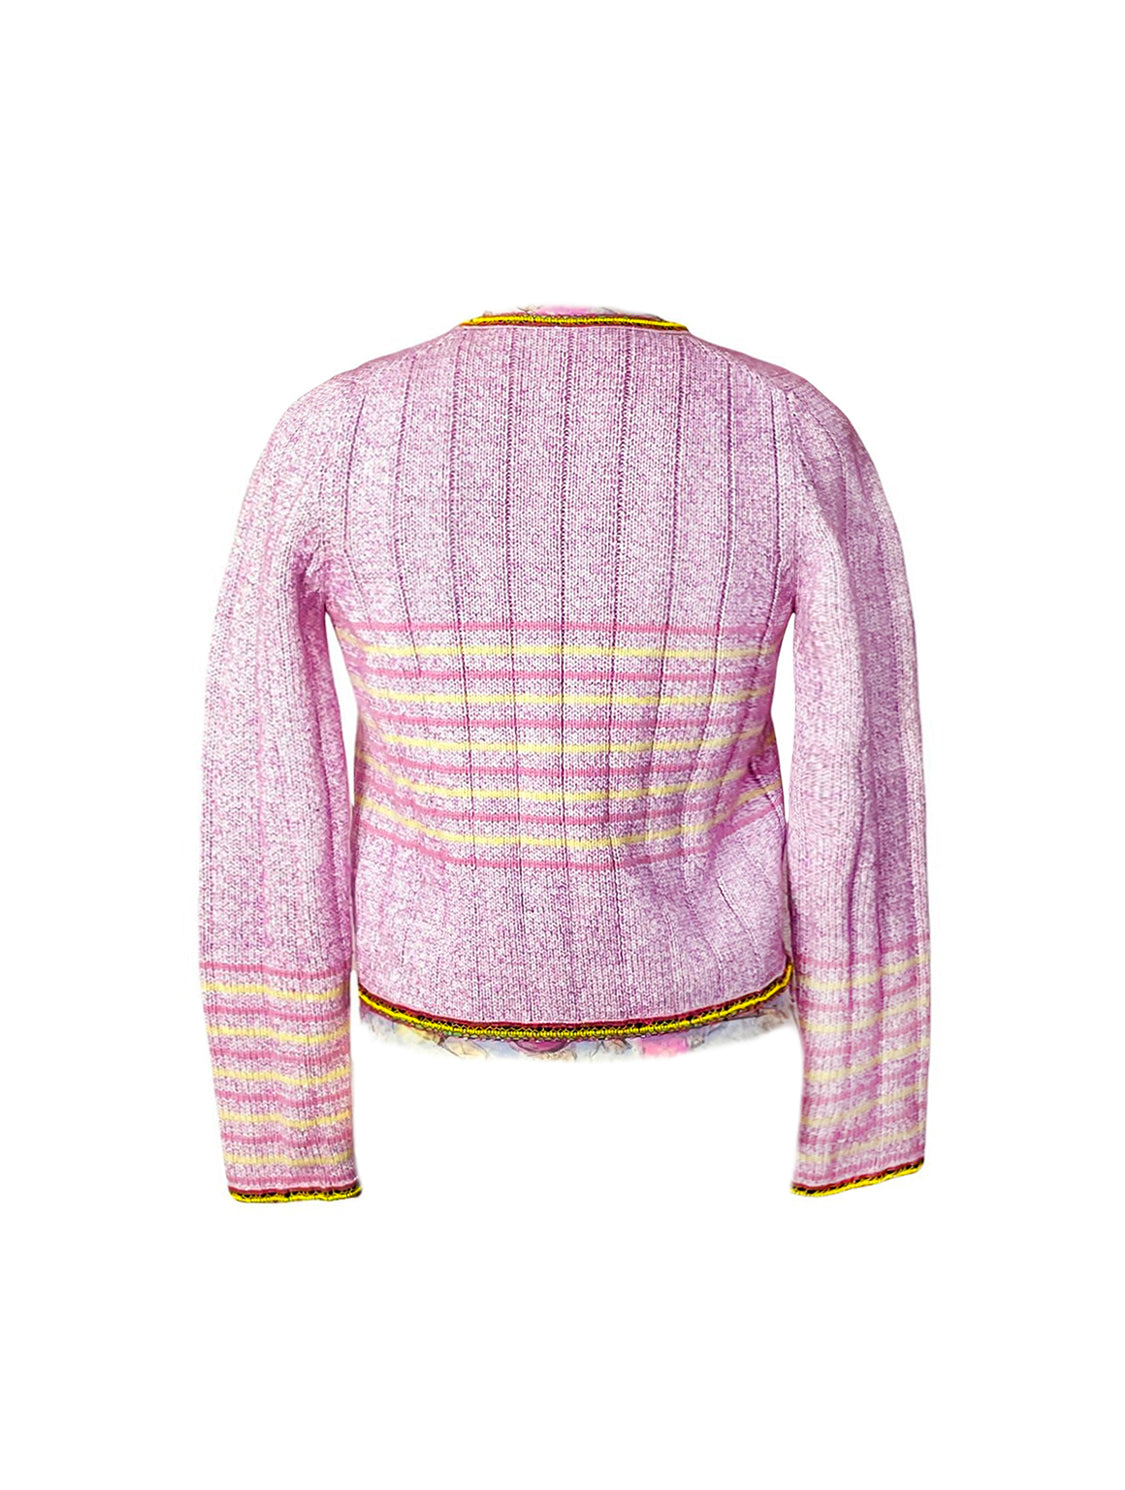 Chanel 2004 SS Rare Knit Tweed Cardigan Jacket · INTO